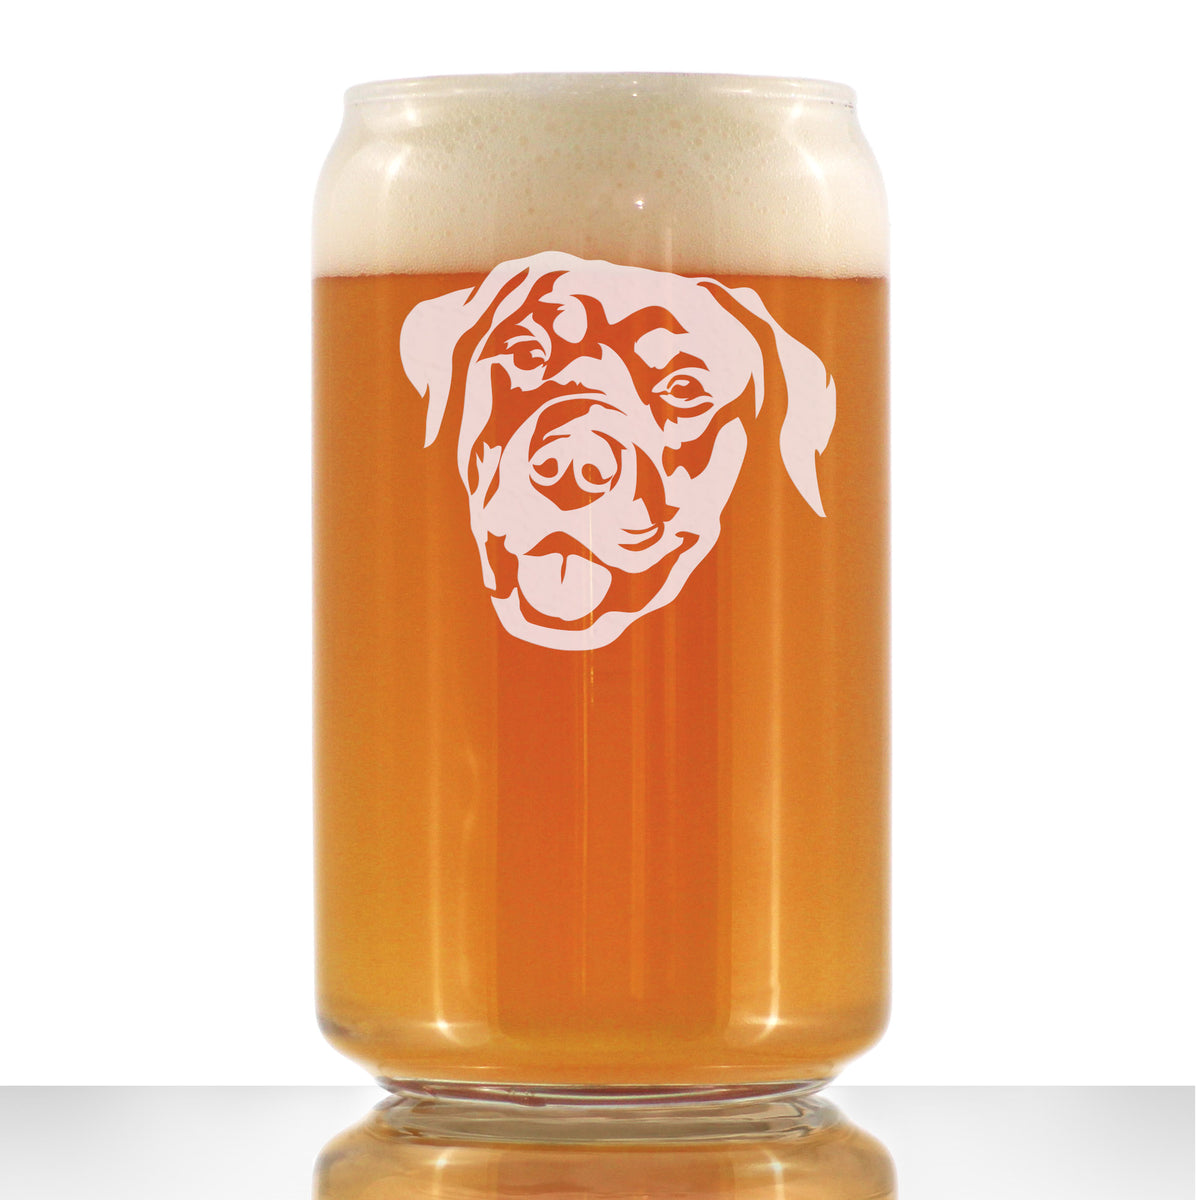 Happy Rottweiler - Beer Can Pint Glass - Fun Unique Rottweiler Themed Dog Gifts and Party Decor for Women and Men - 16 oz